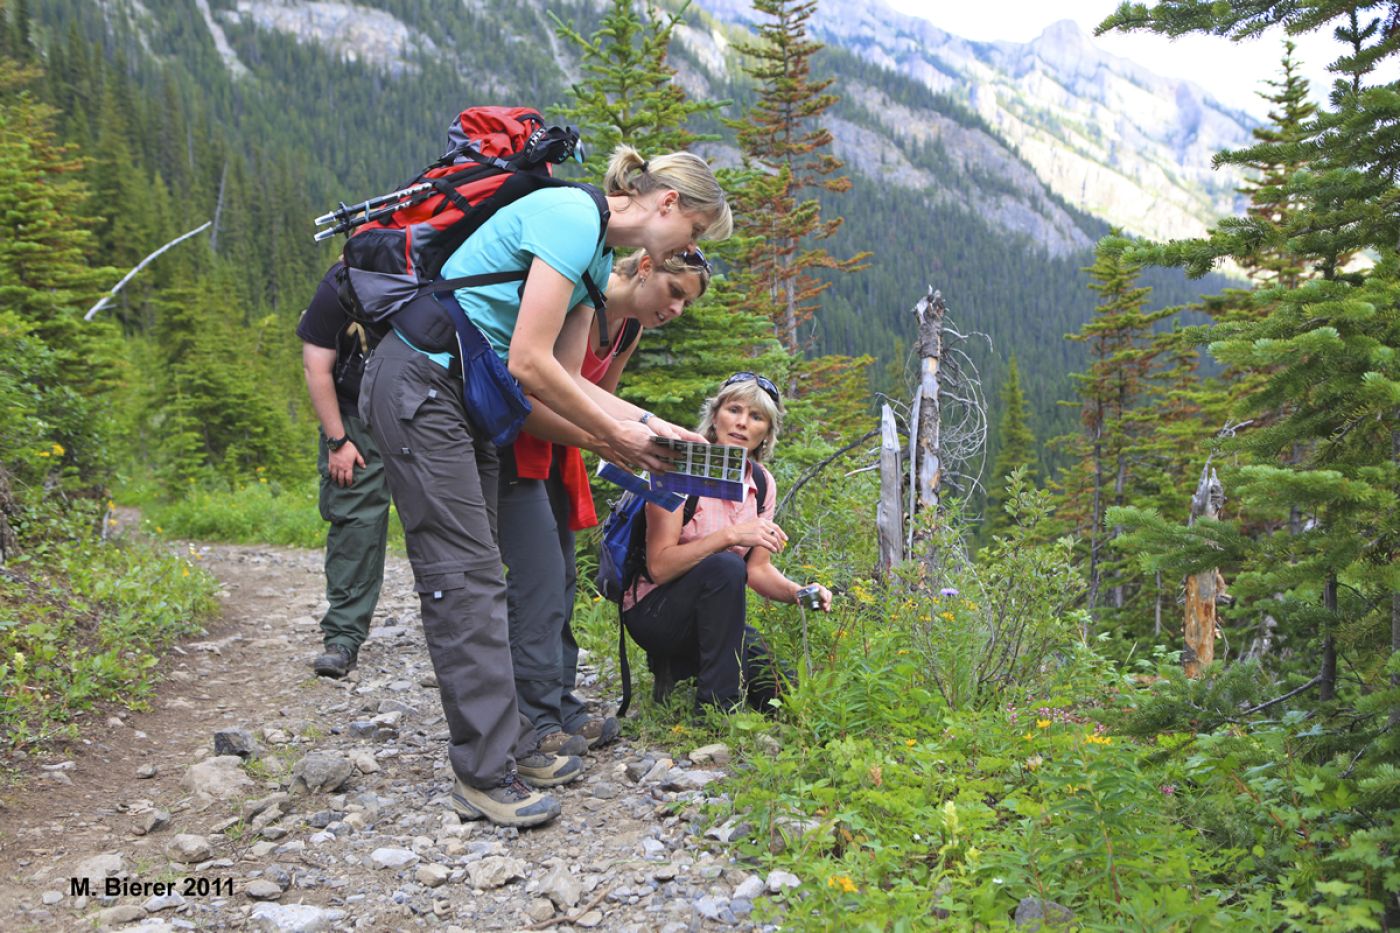 guide with group during camping tour from rockies to vancouver island | reiseleiter mit gruppe bei der zeltreise von rockies bis vancouver island